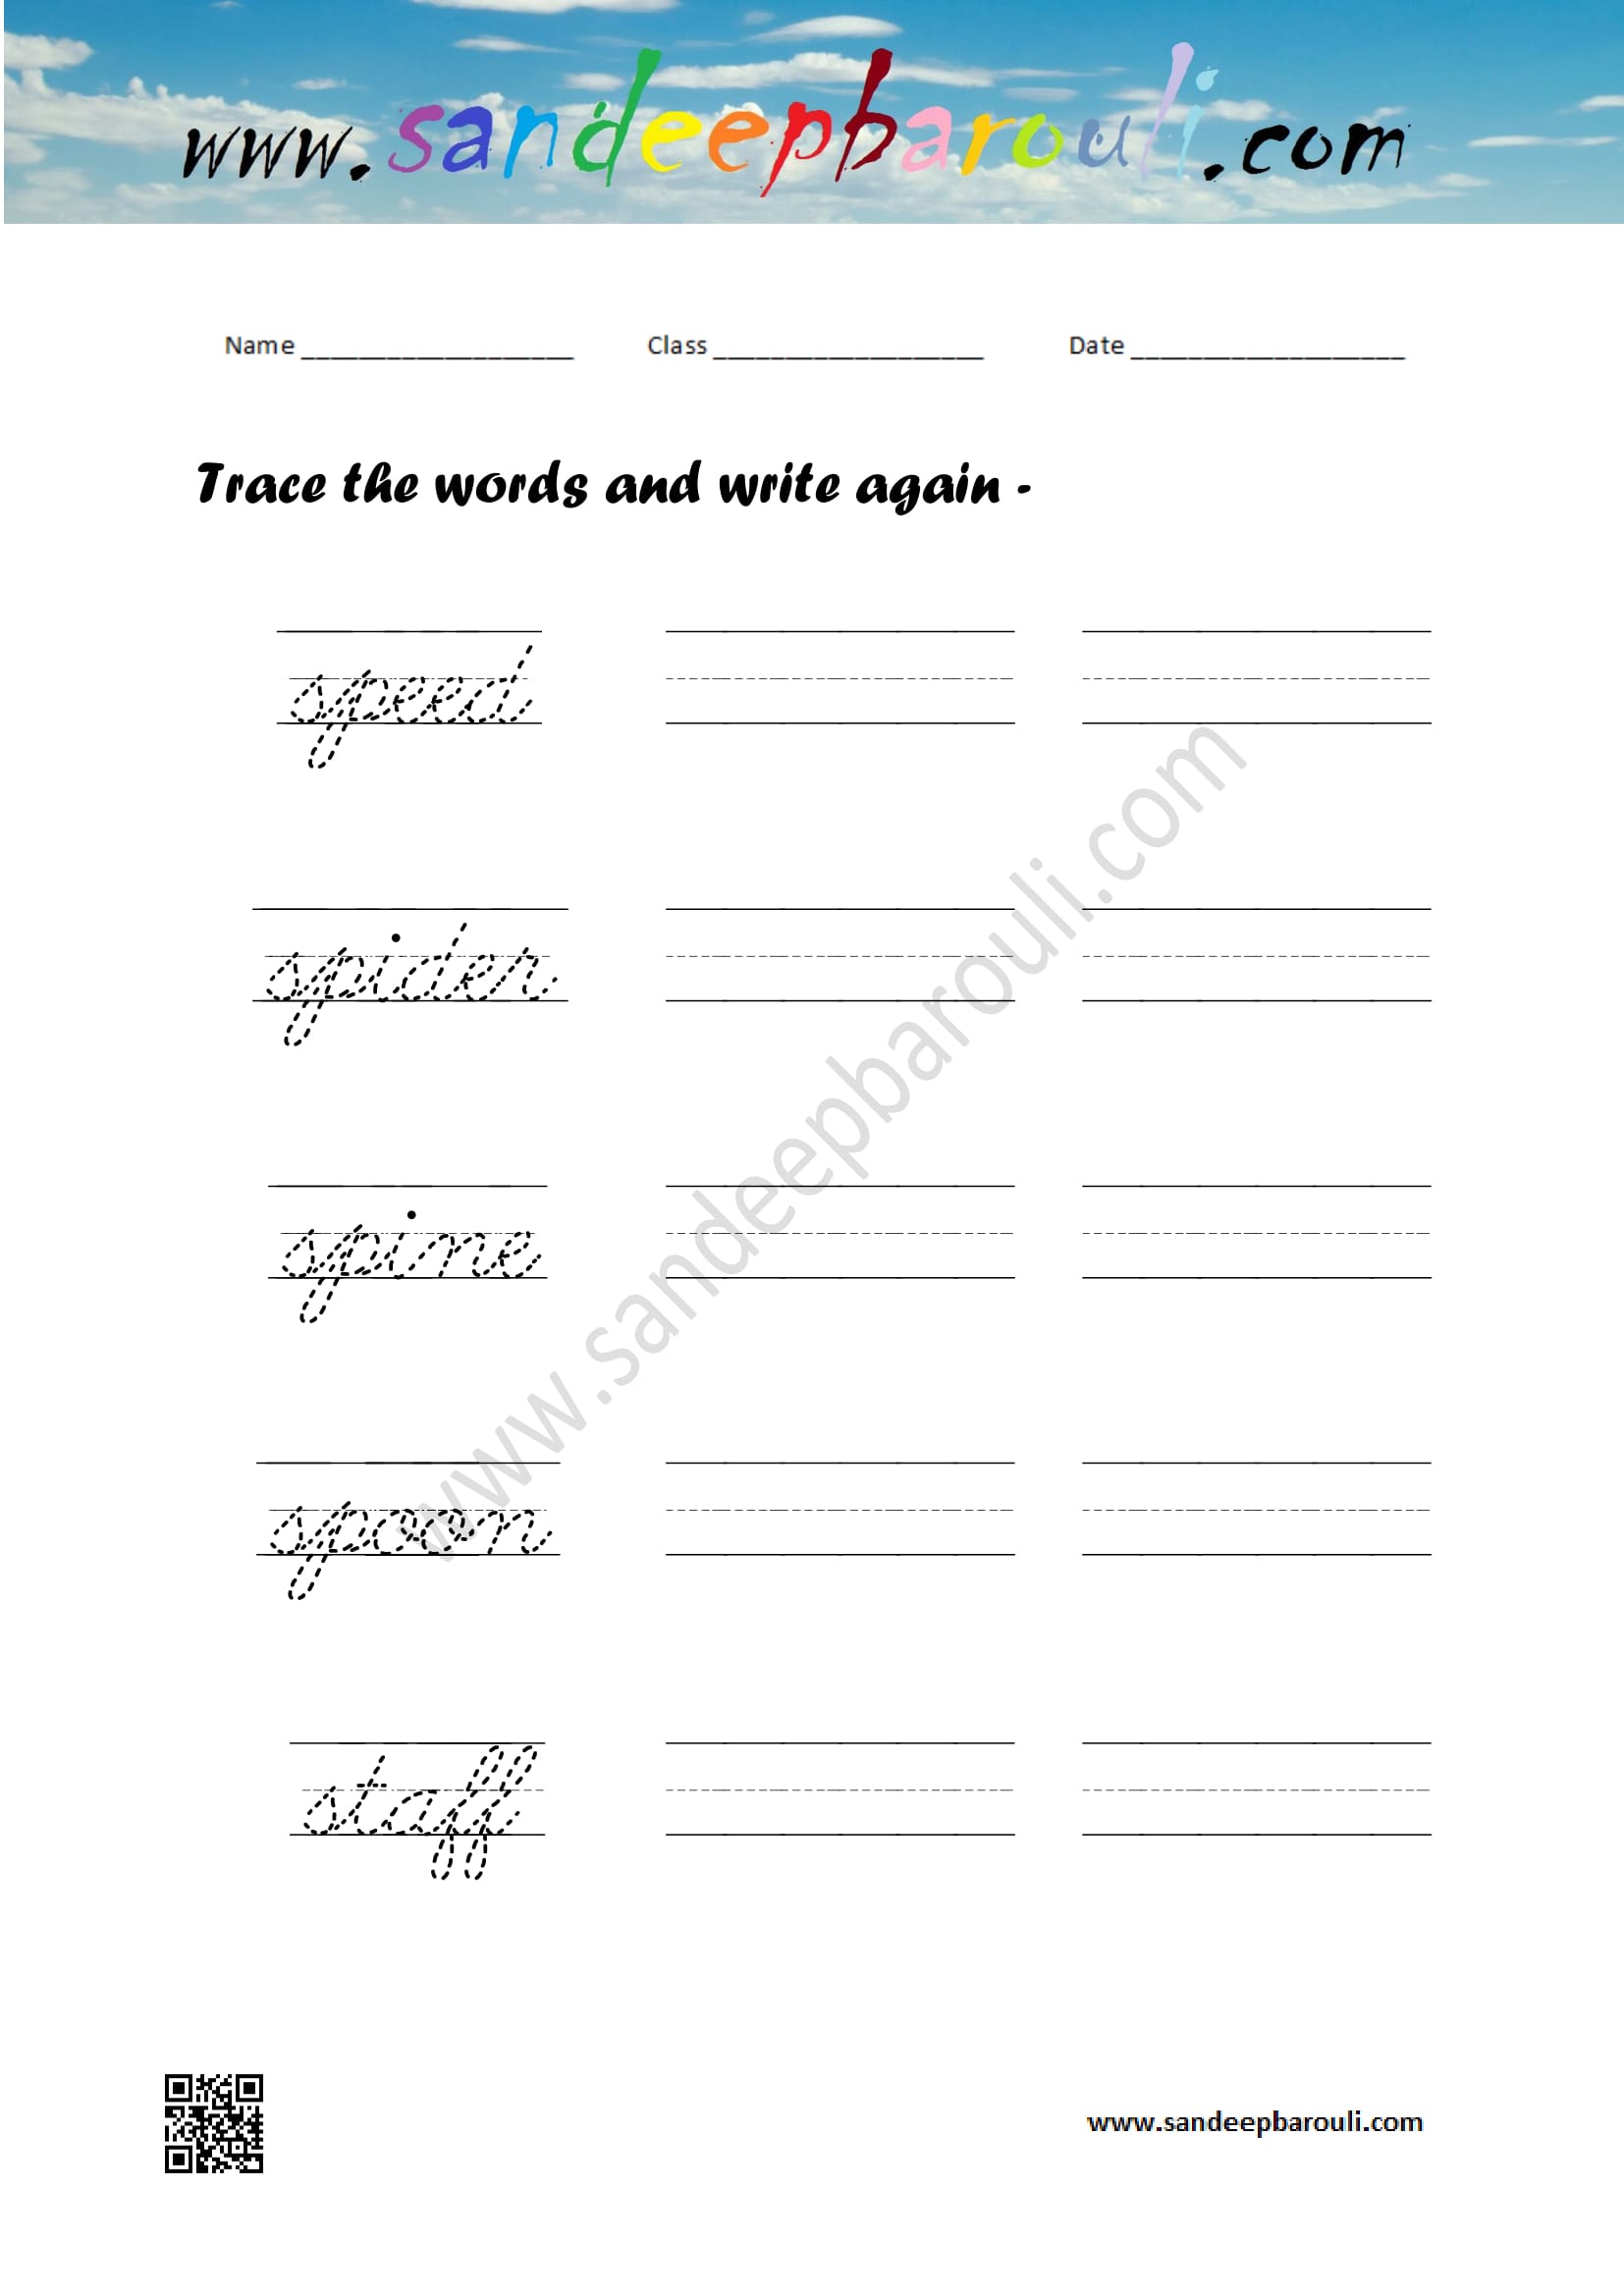 Cursive writing worksheet – trace the words and write again (57)